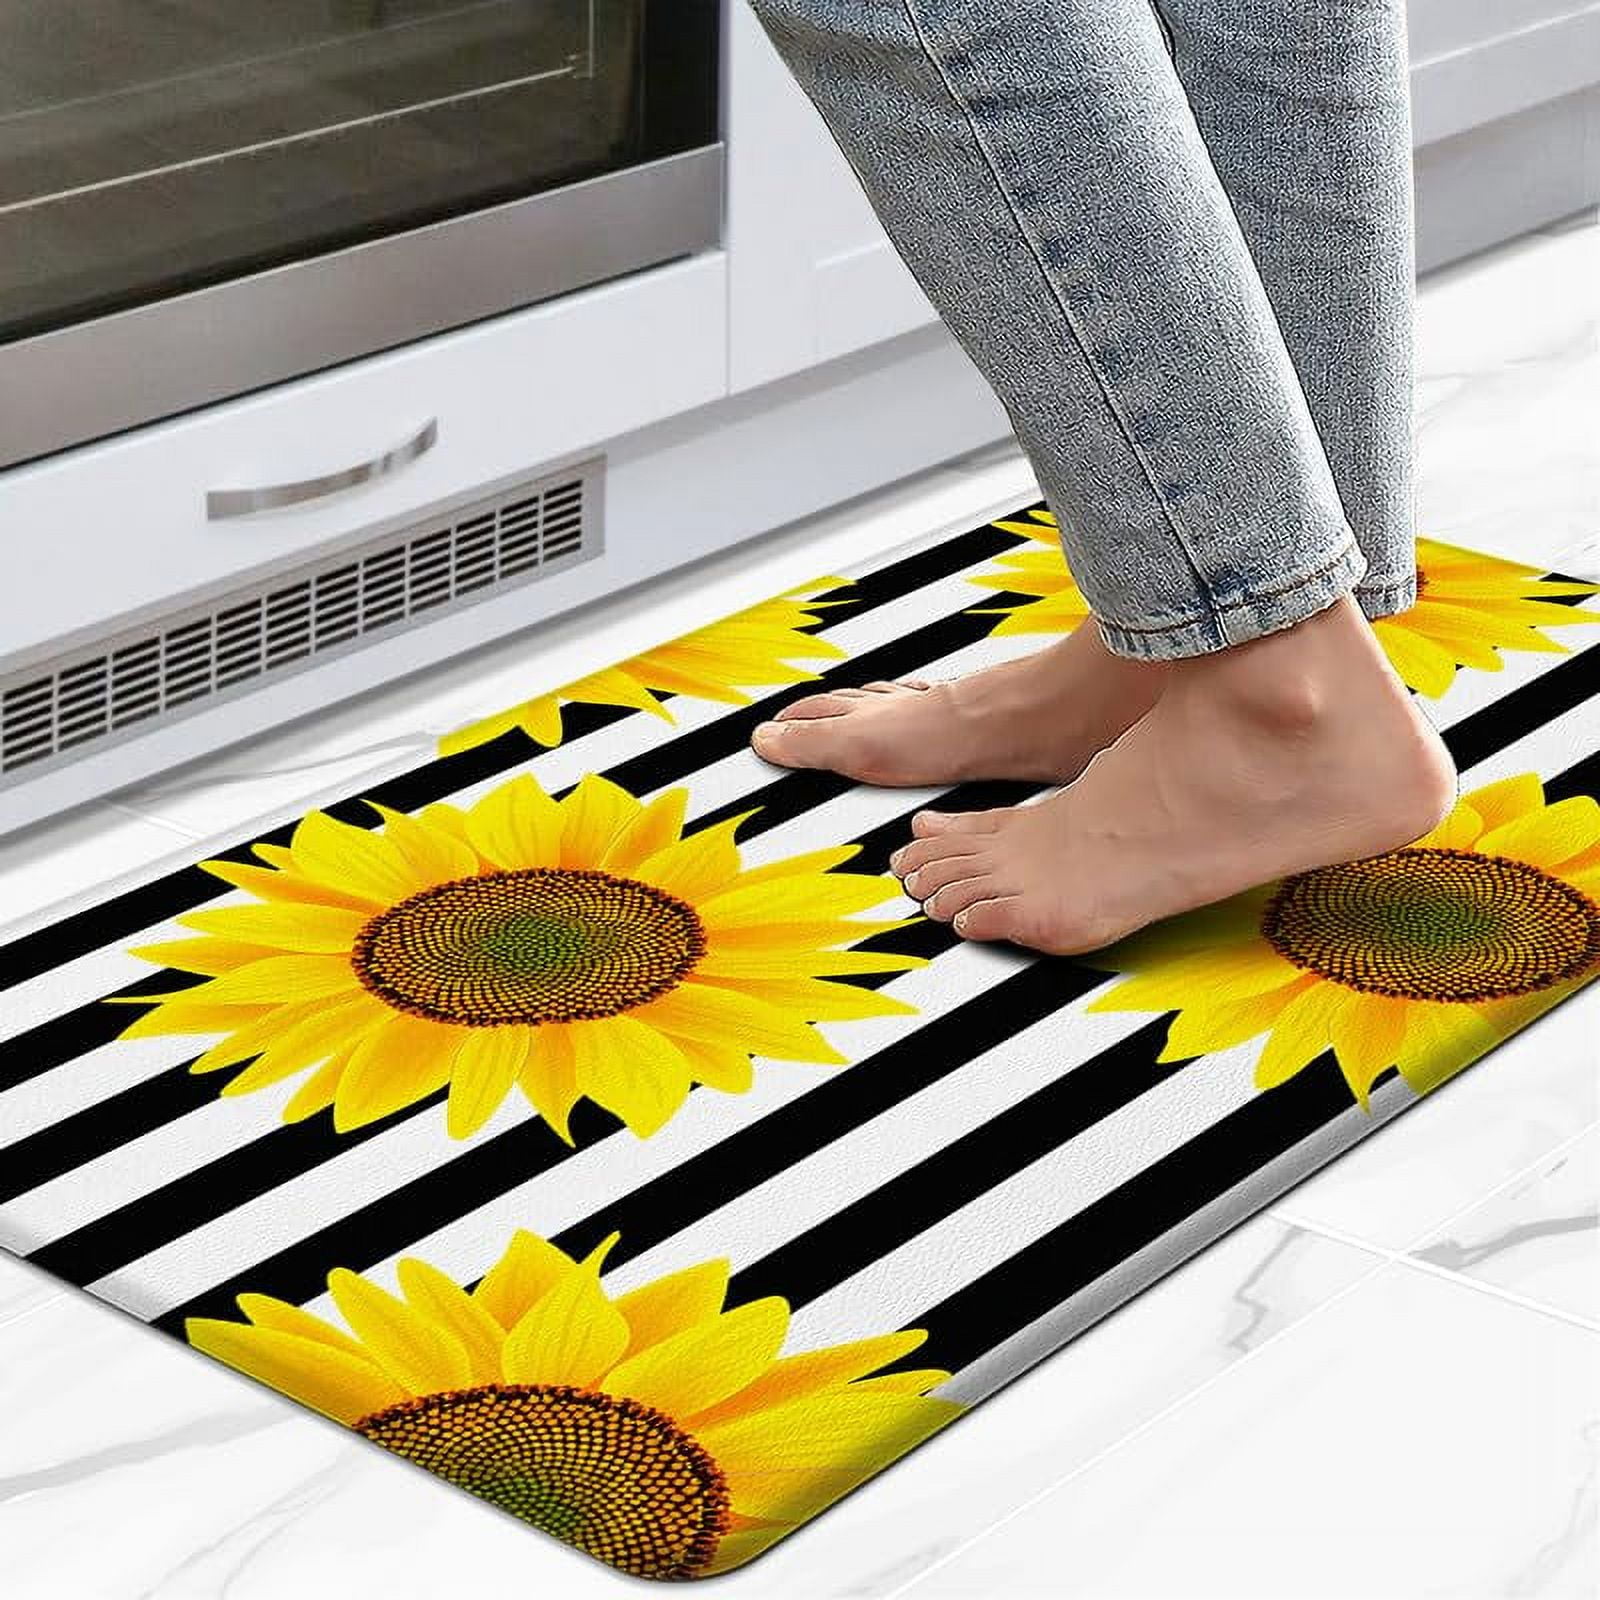 Art3d Black 17 in. x 28 in. Anti-Fatigue Kitchen Mat Non-Slip Foam Comfort  Mats for Standing Desk Office or Laundry Floor Y12hd001BK - The Home Depot